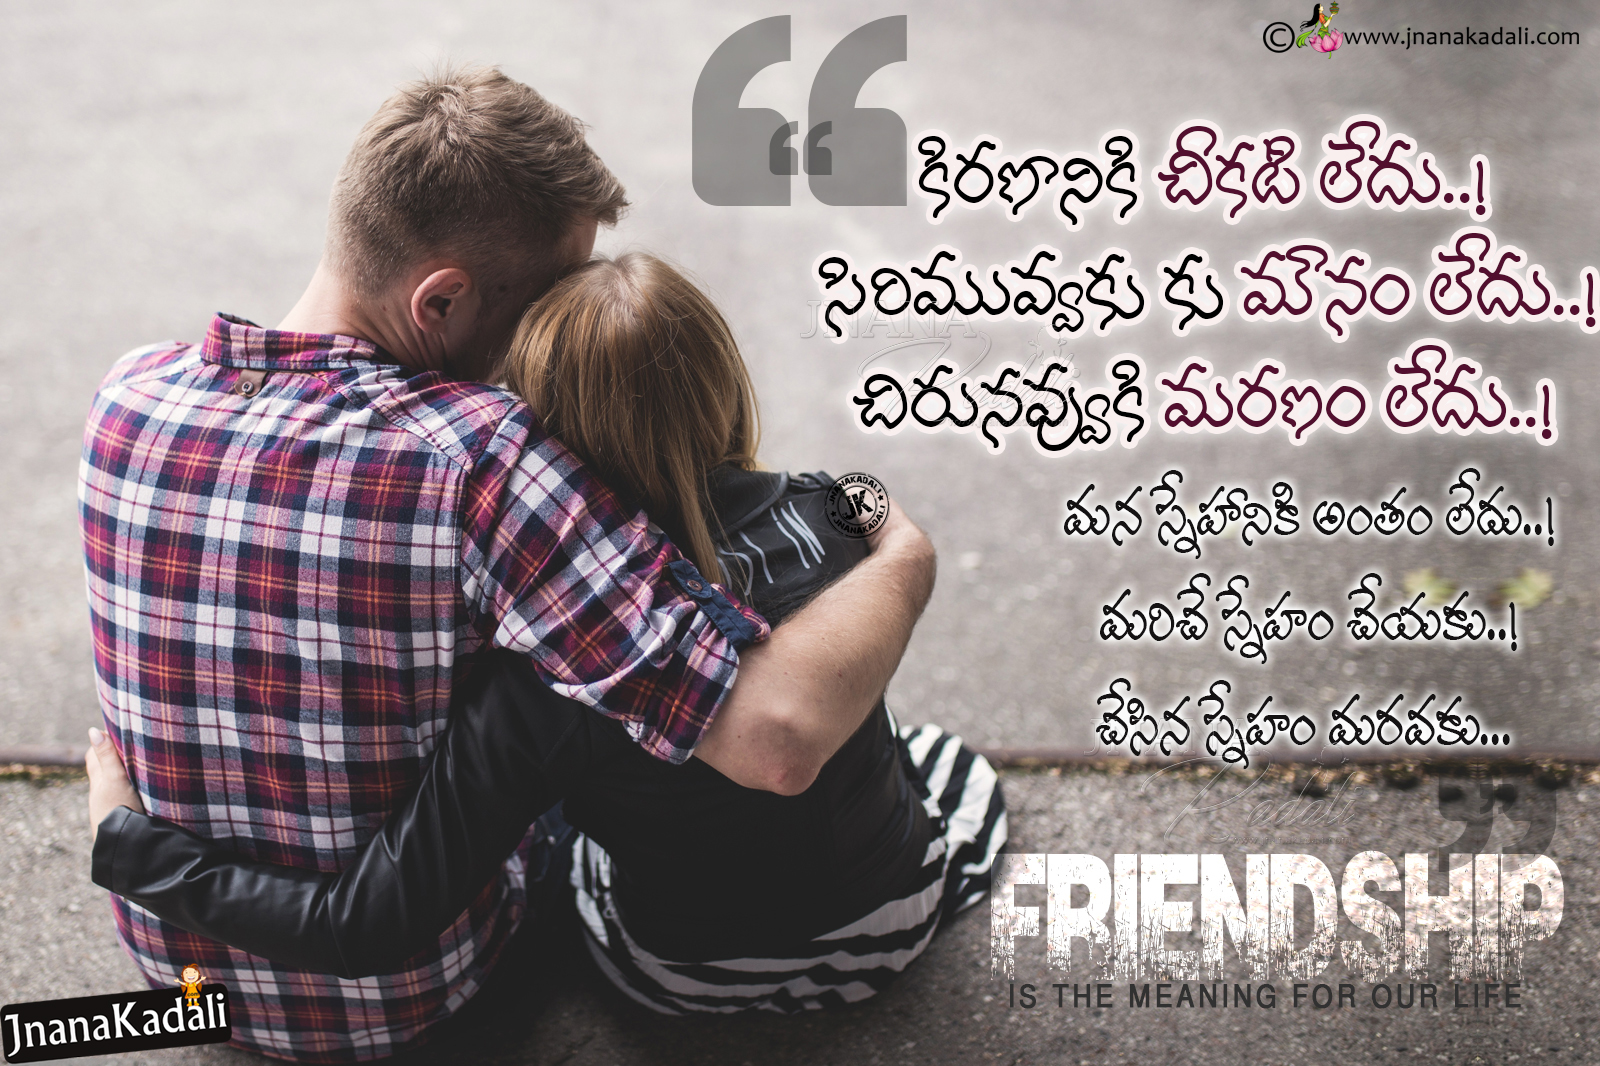 Cool Telugu Friendship Day Greetings Wallpapers For Free | JNANA ...